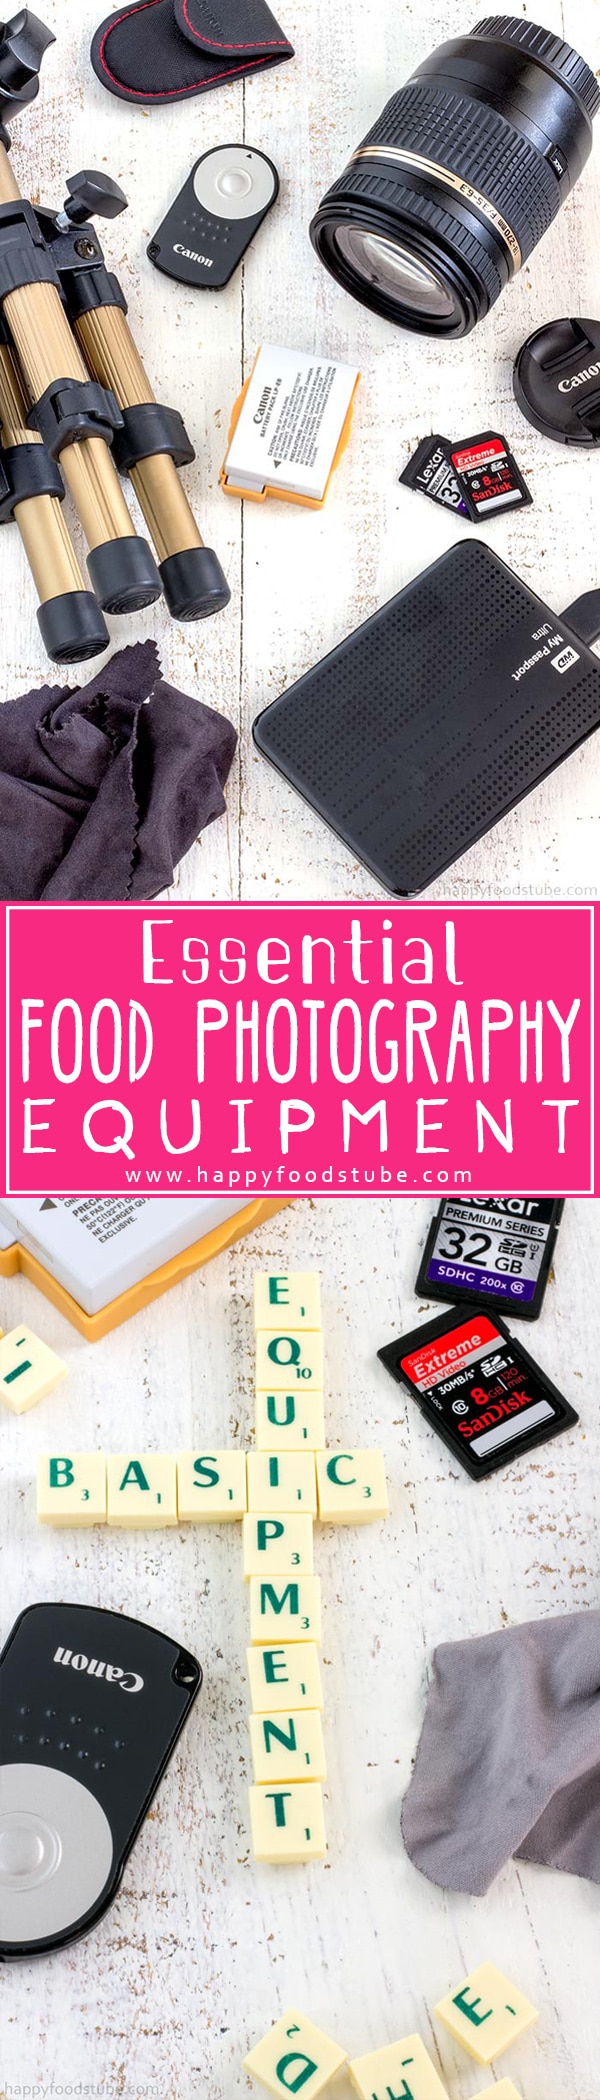 Essential food photography equipment for anyone starting with food photography! 10 basic must-have items I can’t imagine taking photos without! | happyfoodstube.com